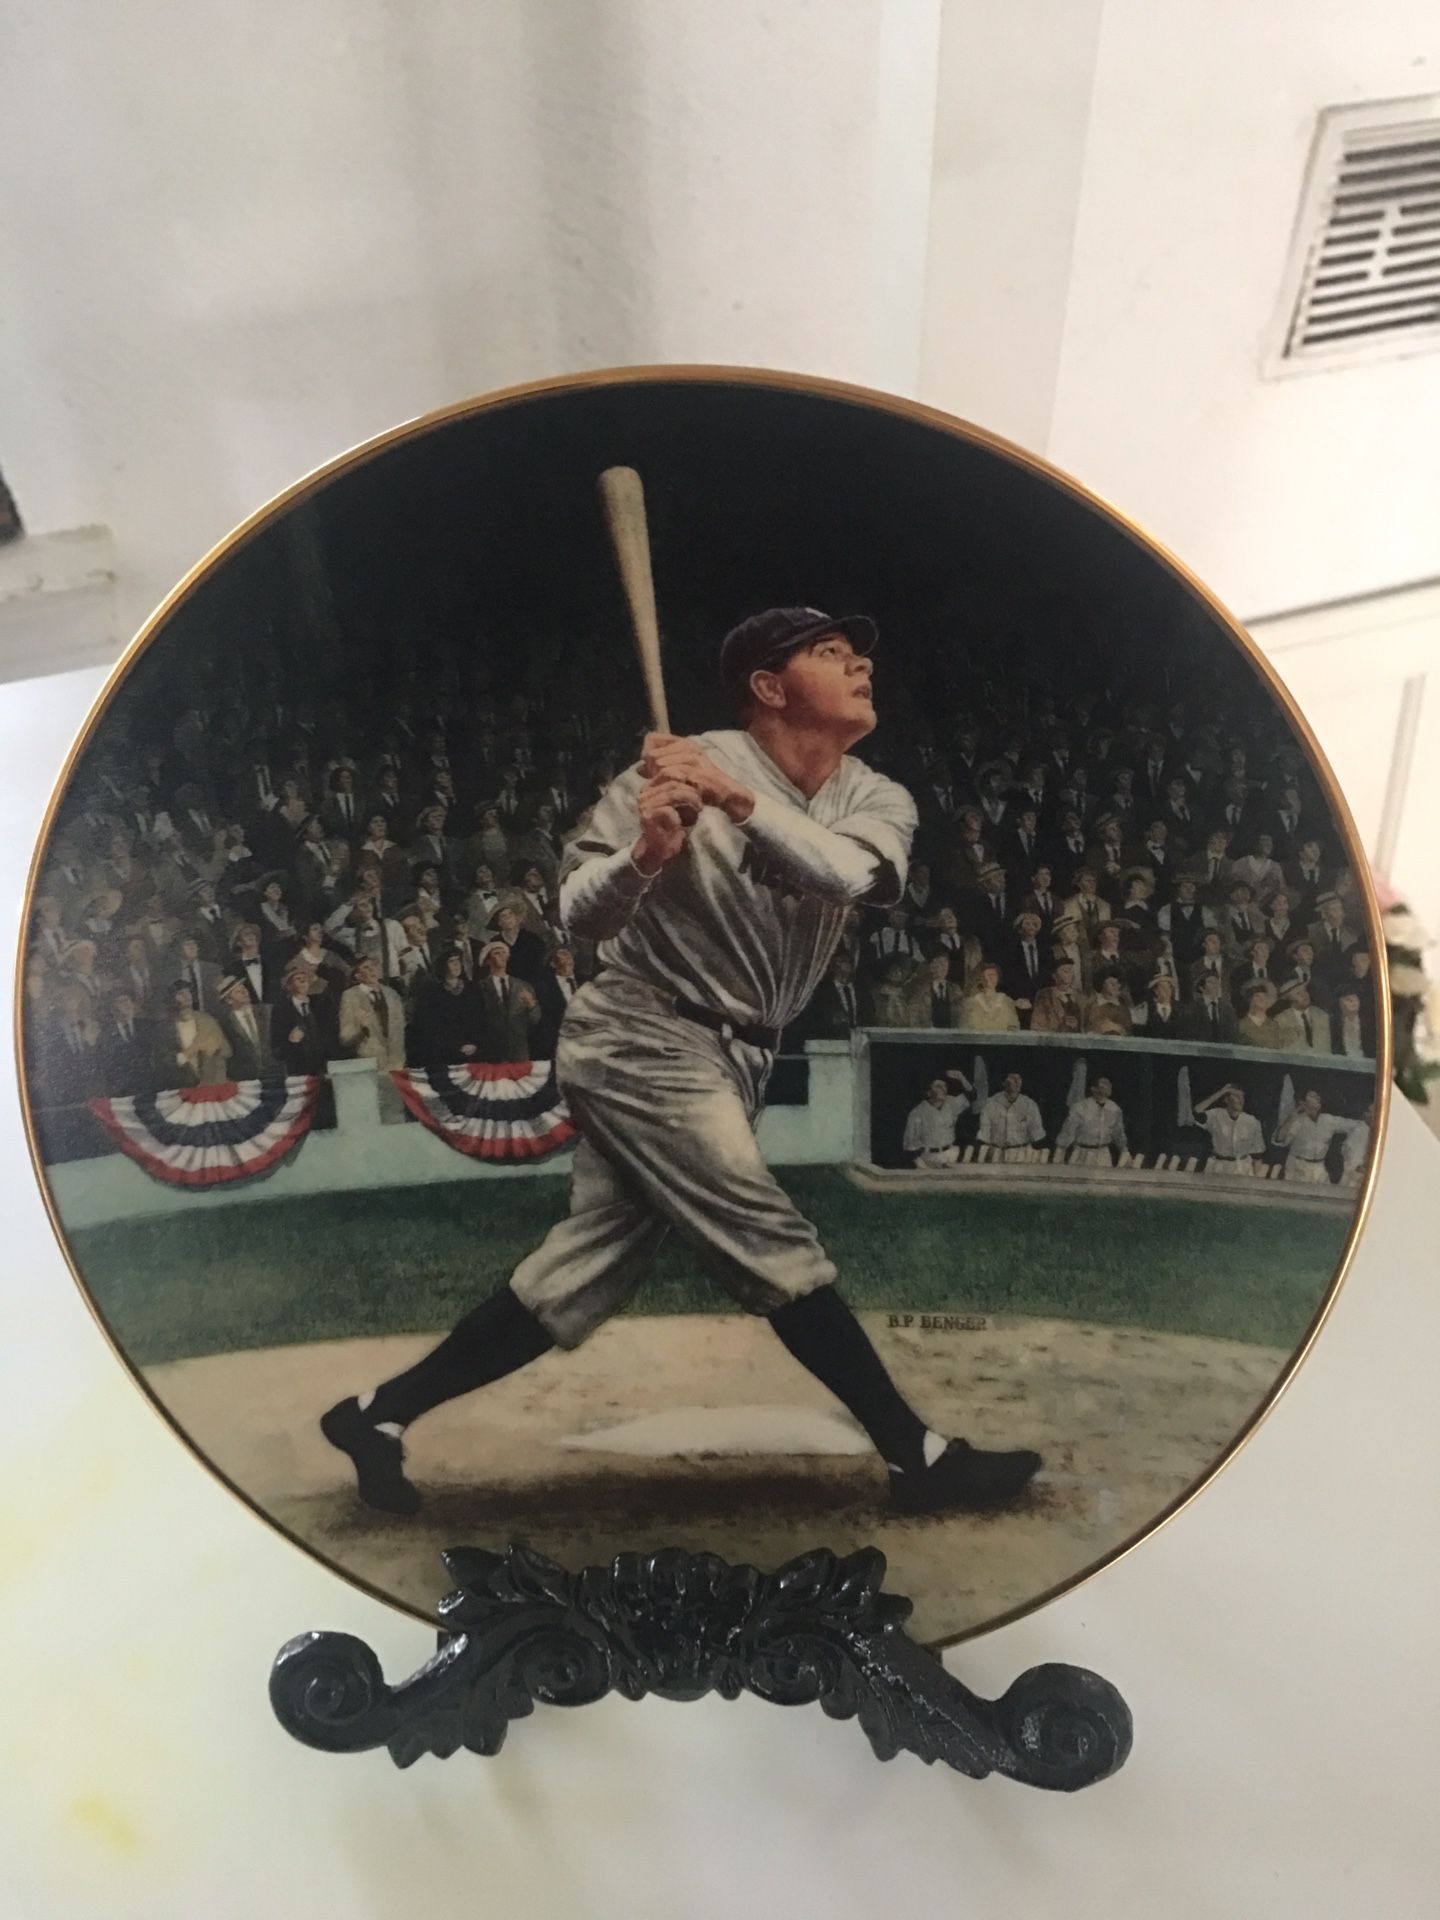 Call It - Babe Ruth Collection